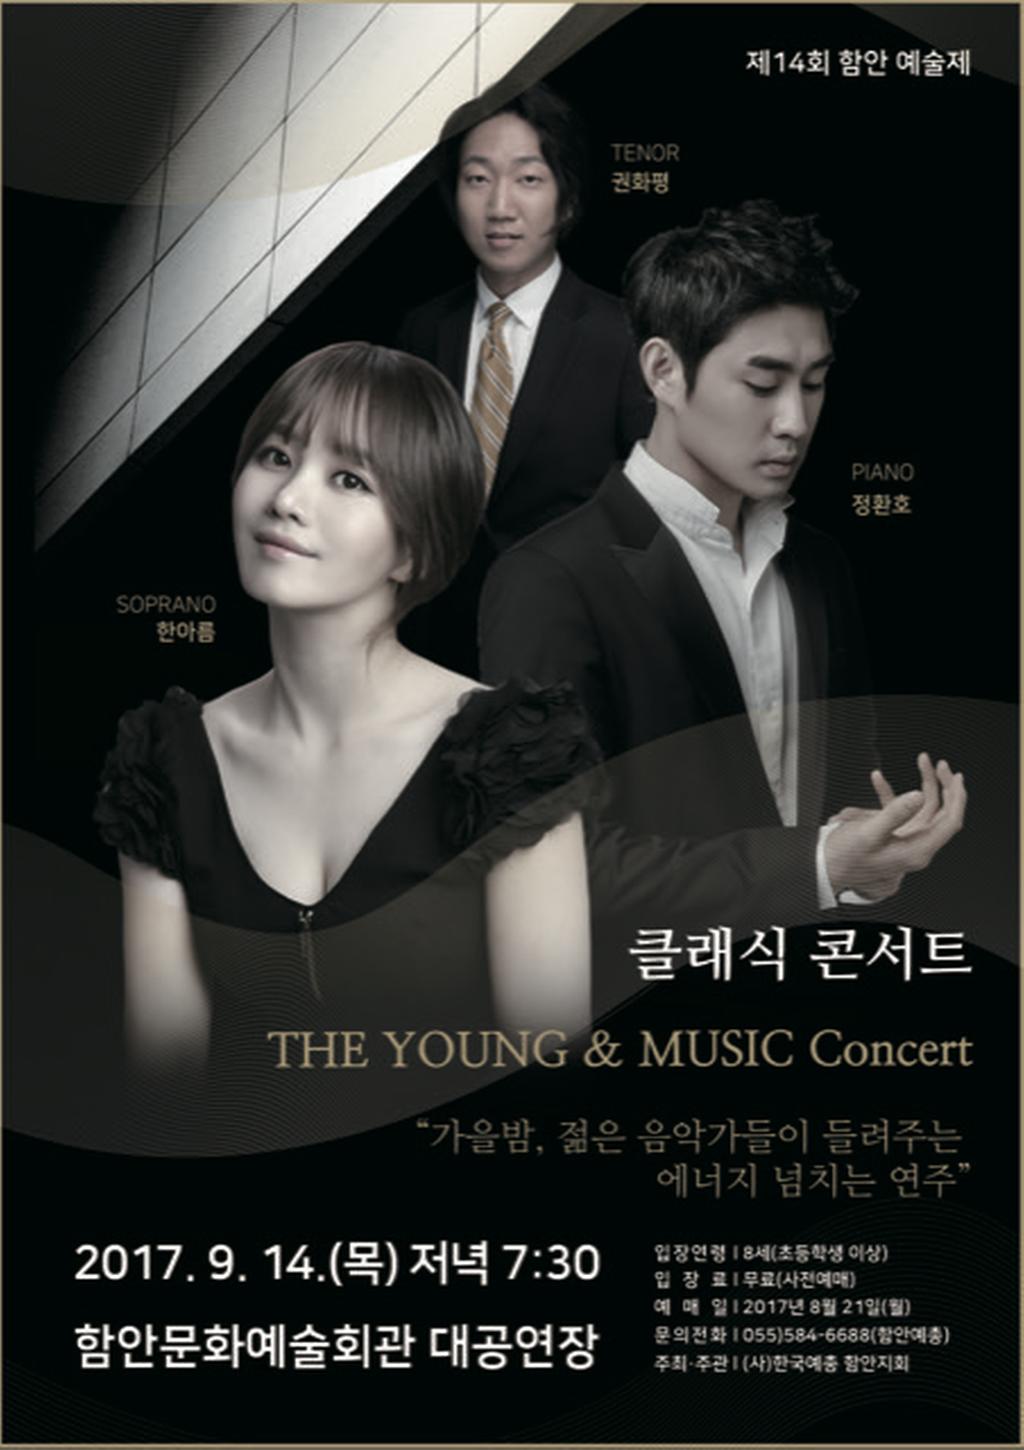 THE YOUNG & MUSIC Concert 클래식 콘서트 